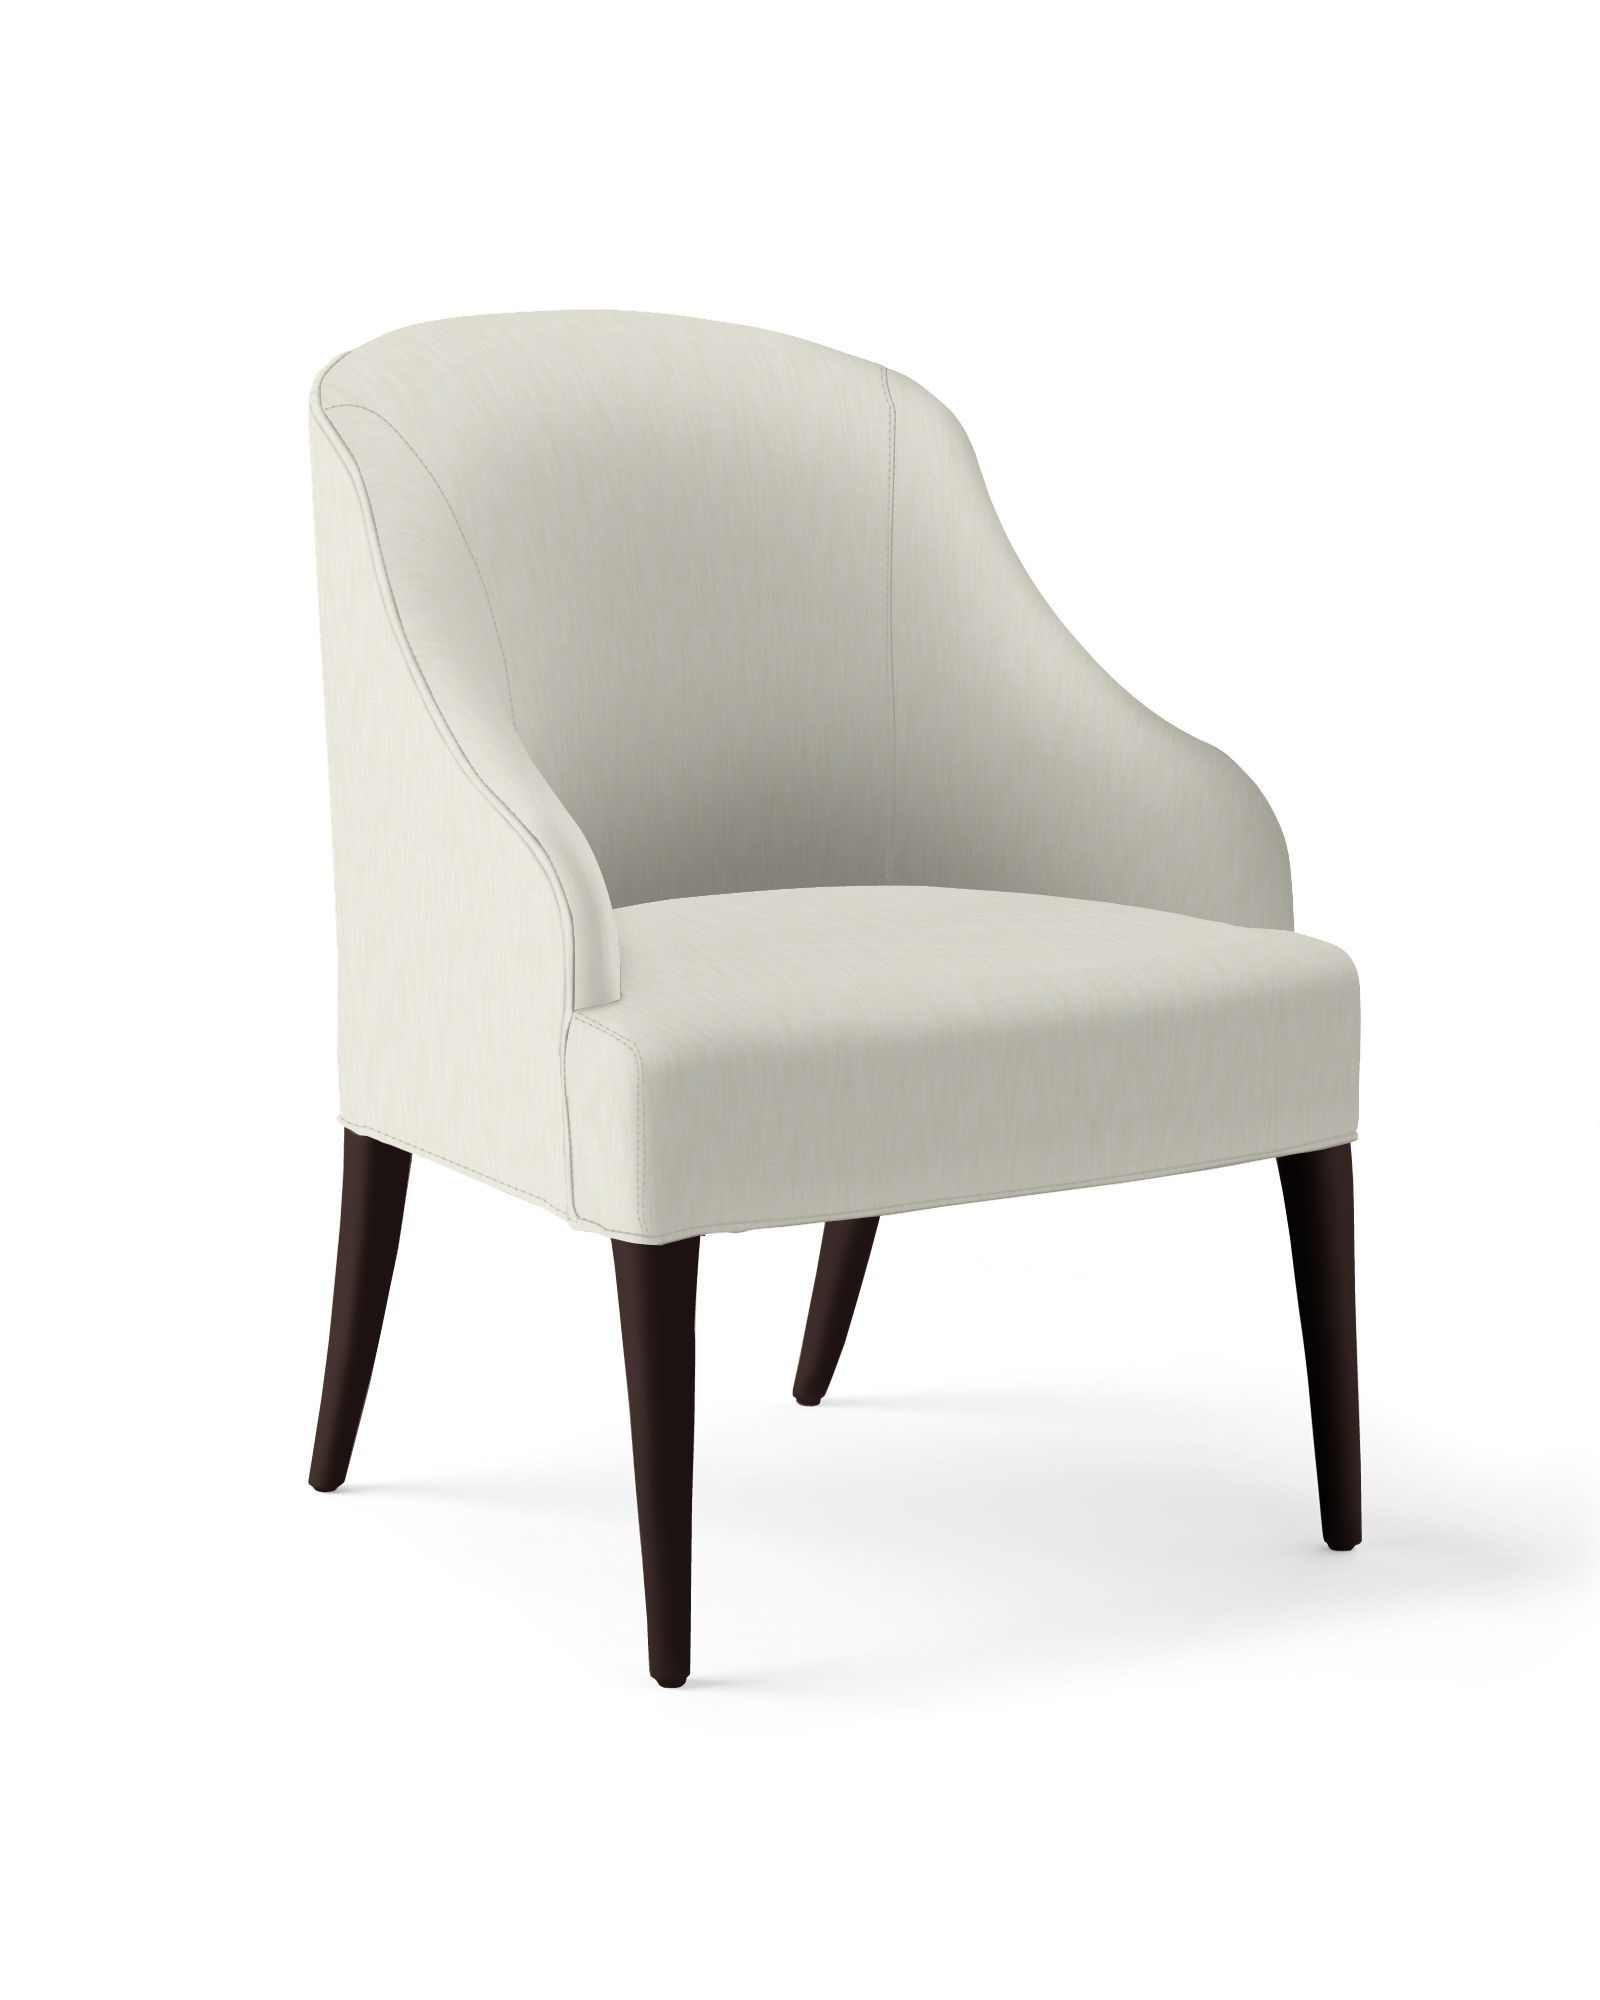 Darien Dining Chair | Serena and Lily